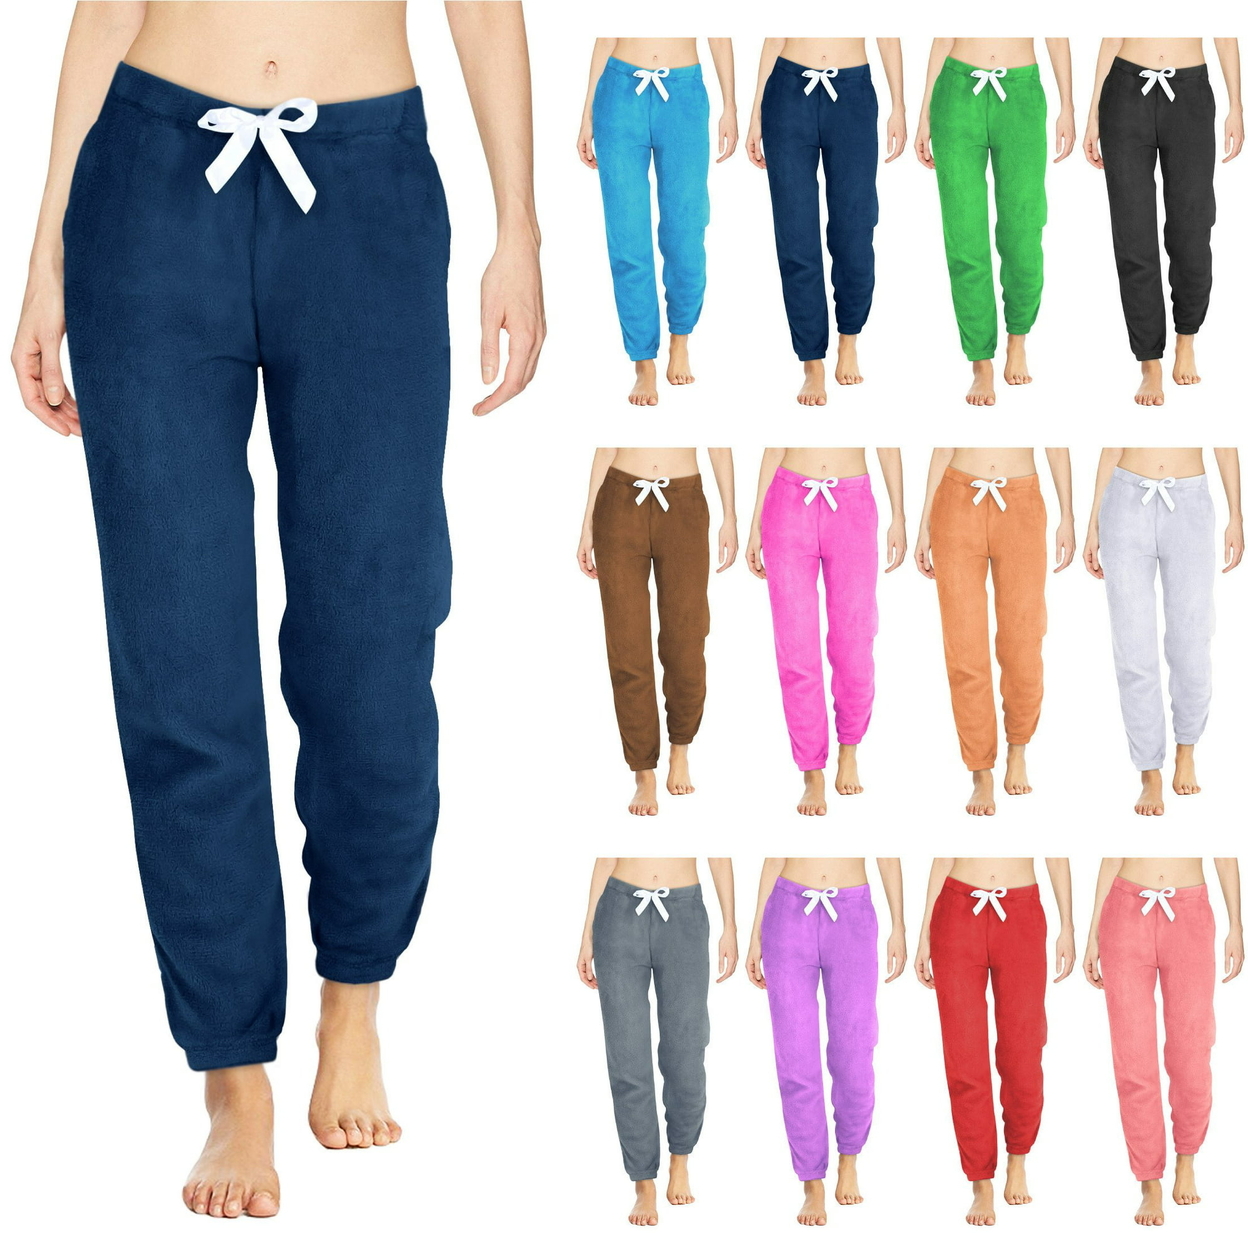 Multi-Pack: Women's Solid & Printed Ultra-Soft Comfy Stretch Micro-Fleece Pajama Lounge Pants - 3-pack, X-large, Animal